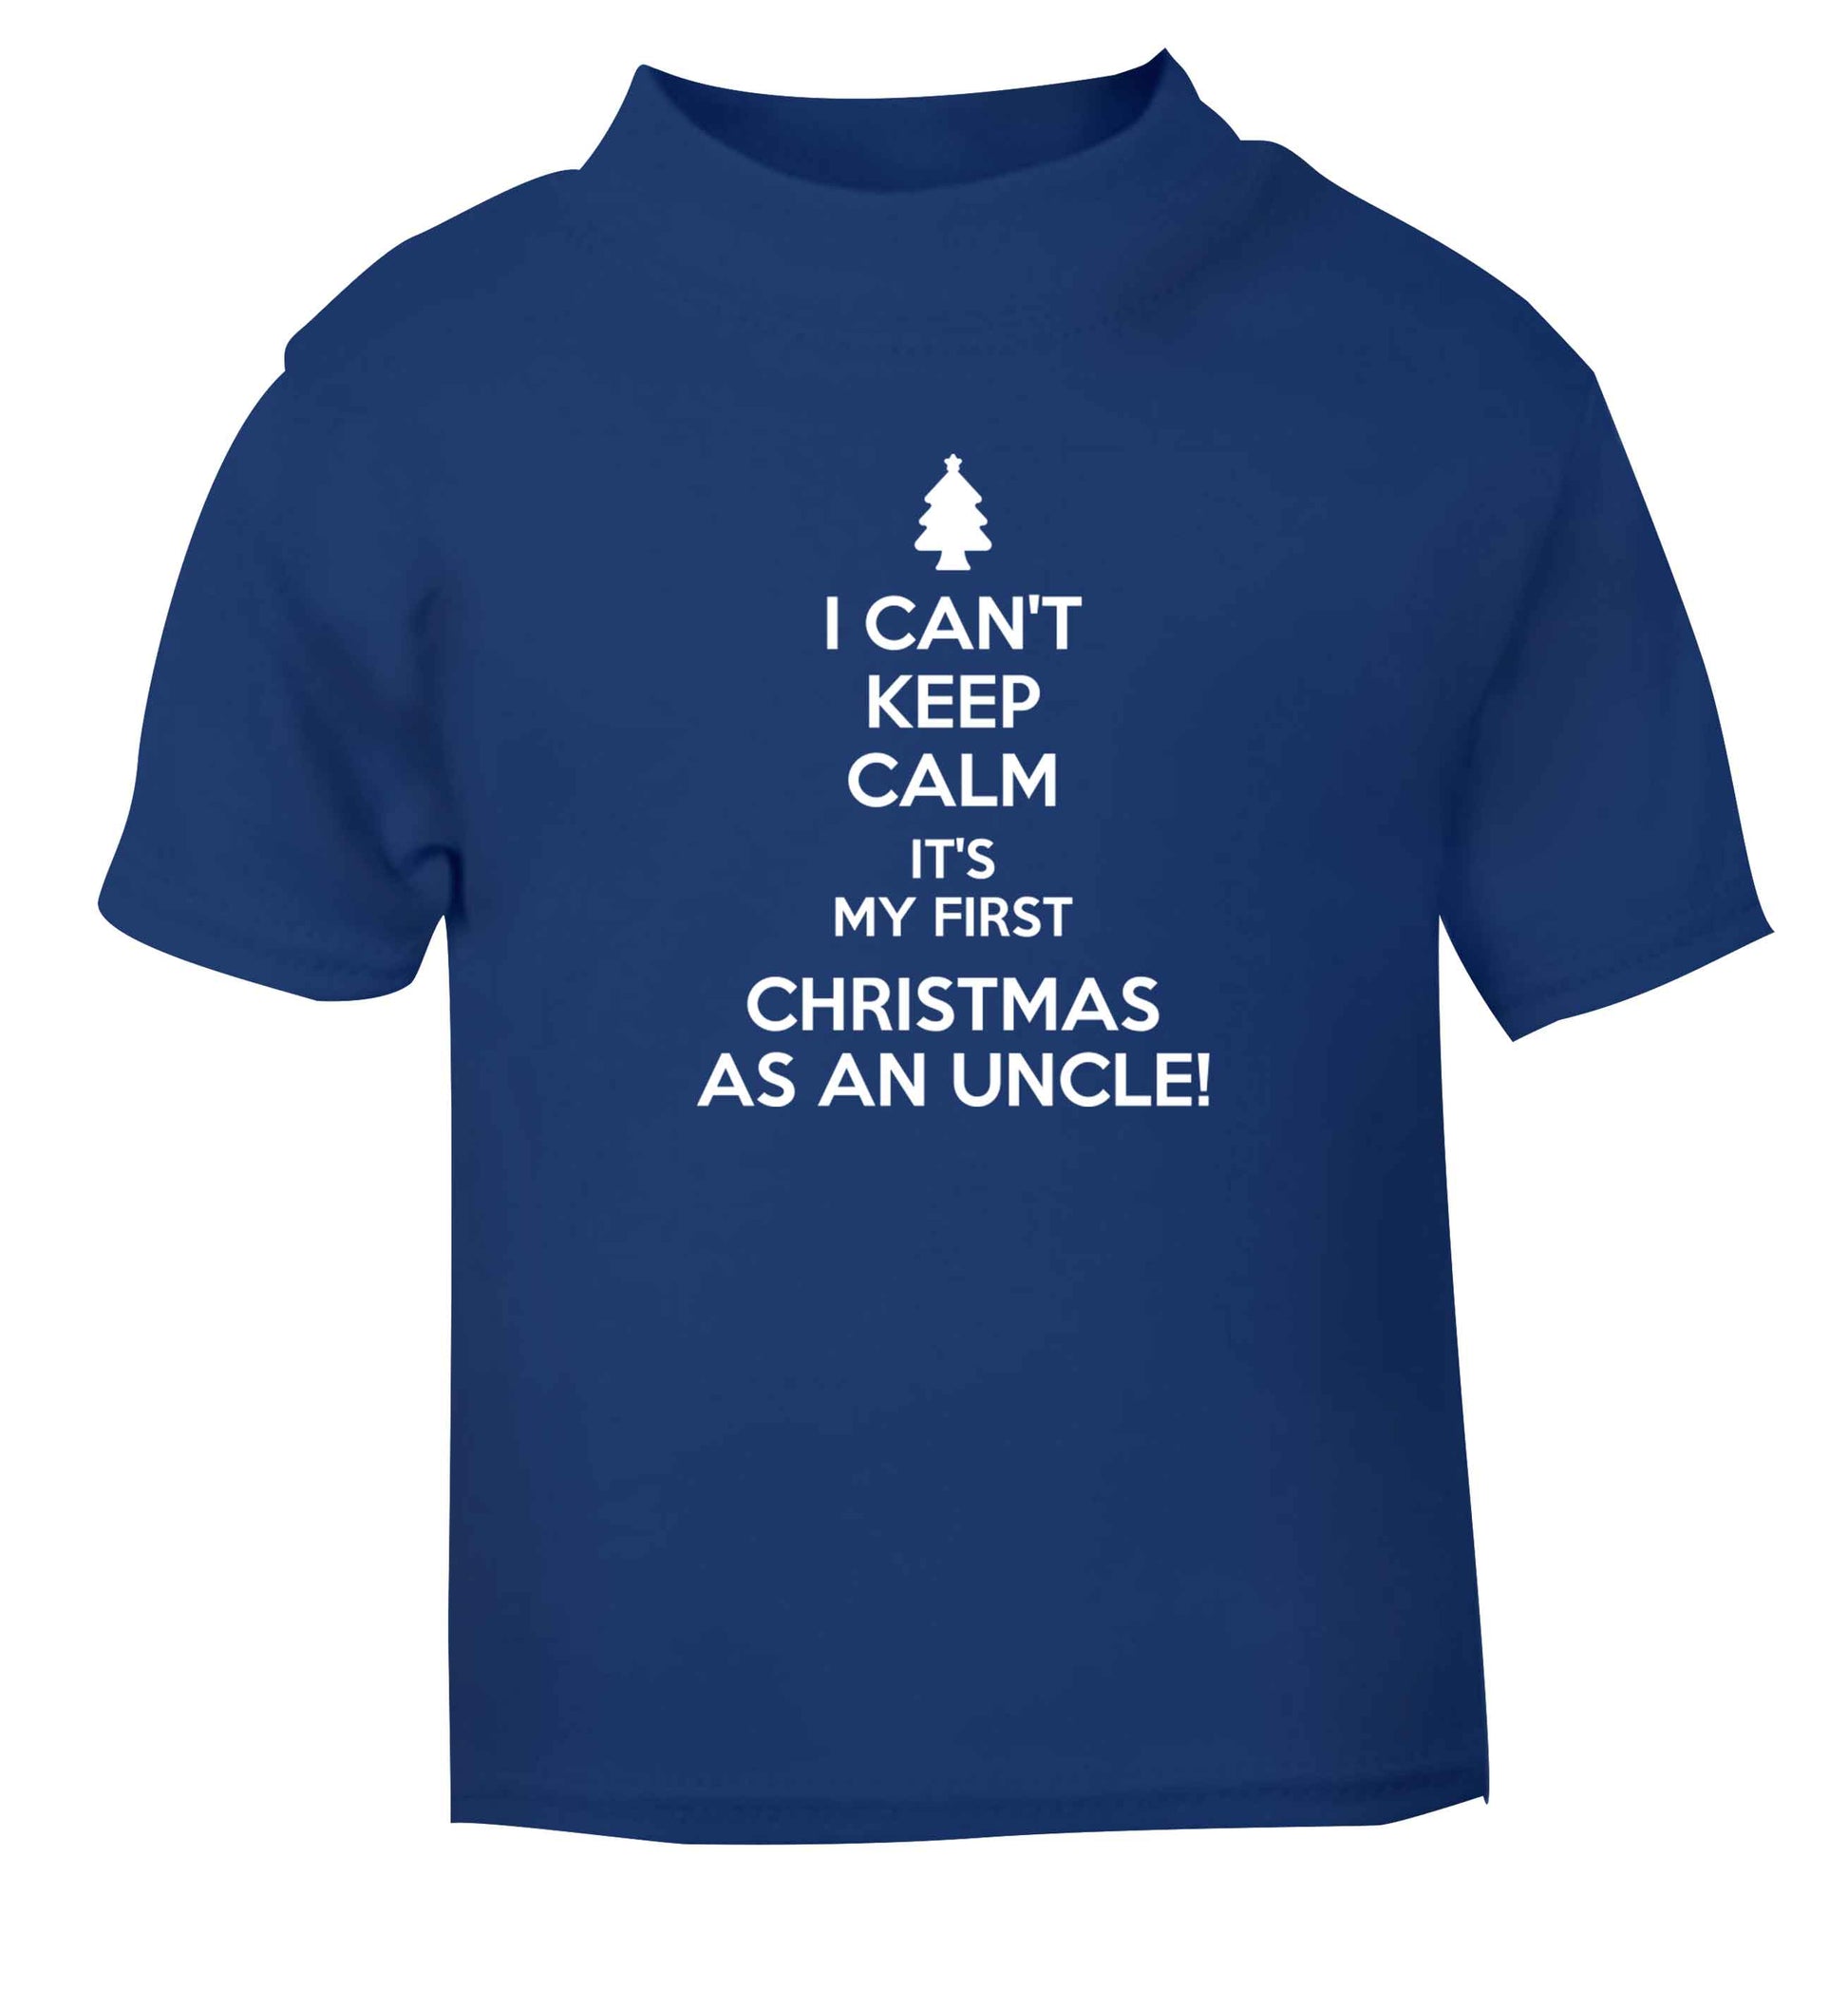 I can't keep calm it's my first Christmas as an uncle! blue Baby Toddler Tshirt 2 Years